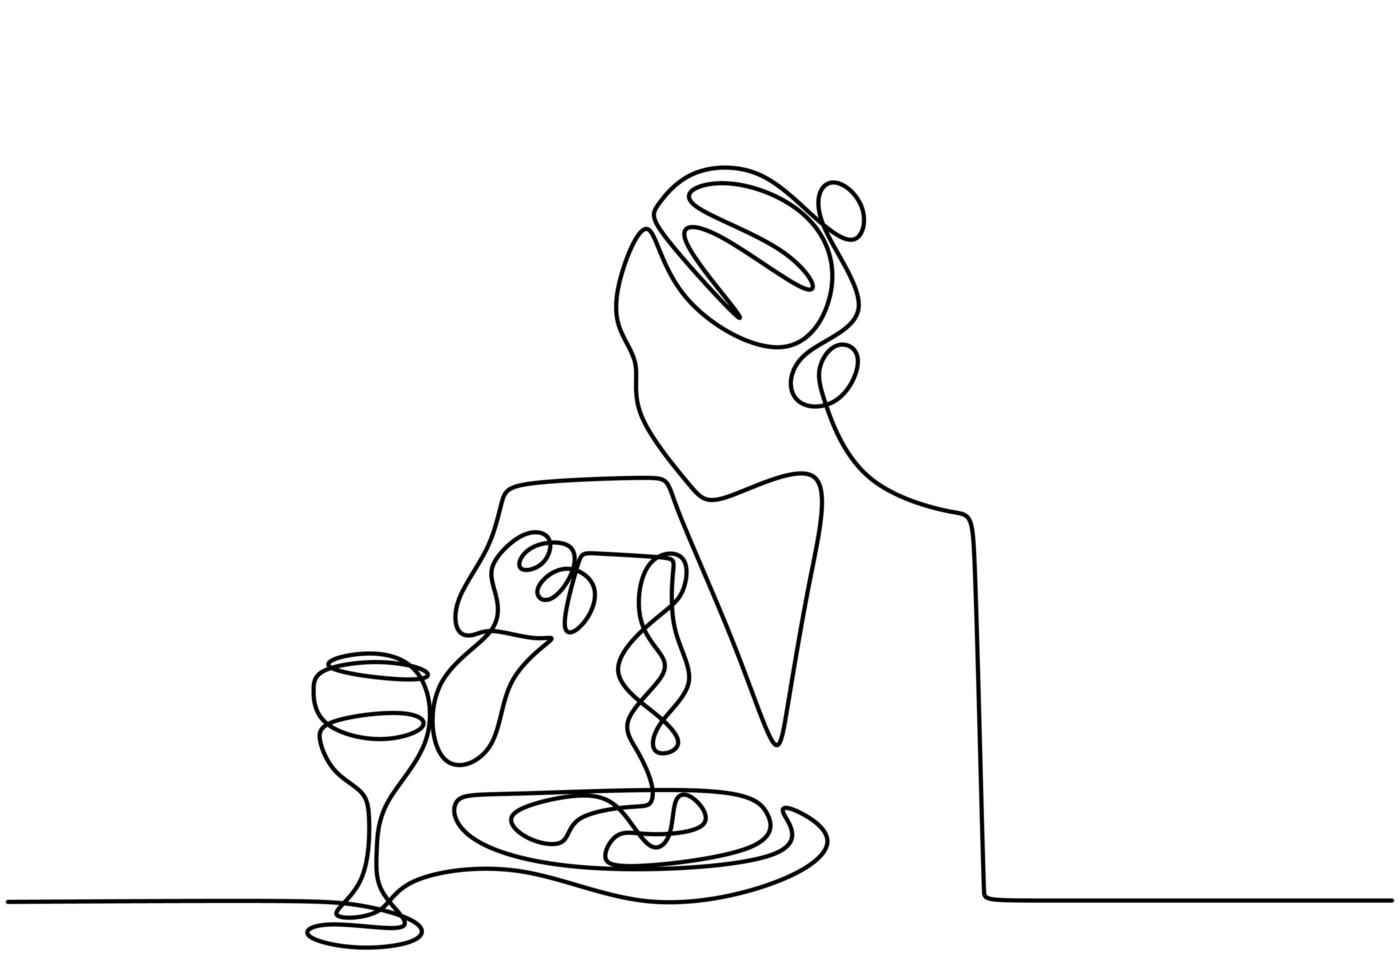 Continuous one line drawing, vector of young woman eating meal food. Minimalism design with simplicity hand drawn isolated on white background. Pretty girl eating dinner or breakfast.